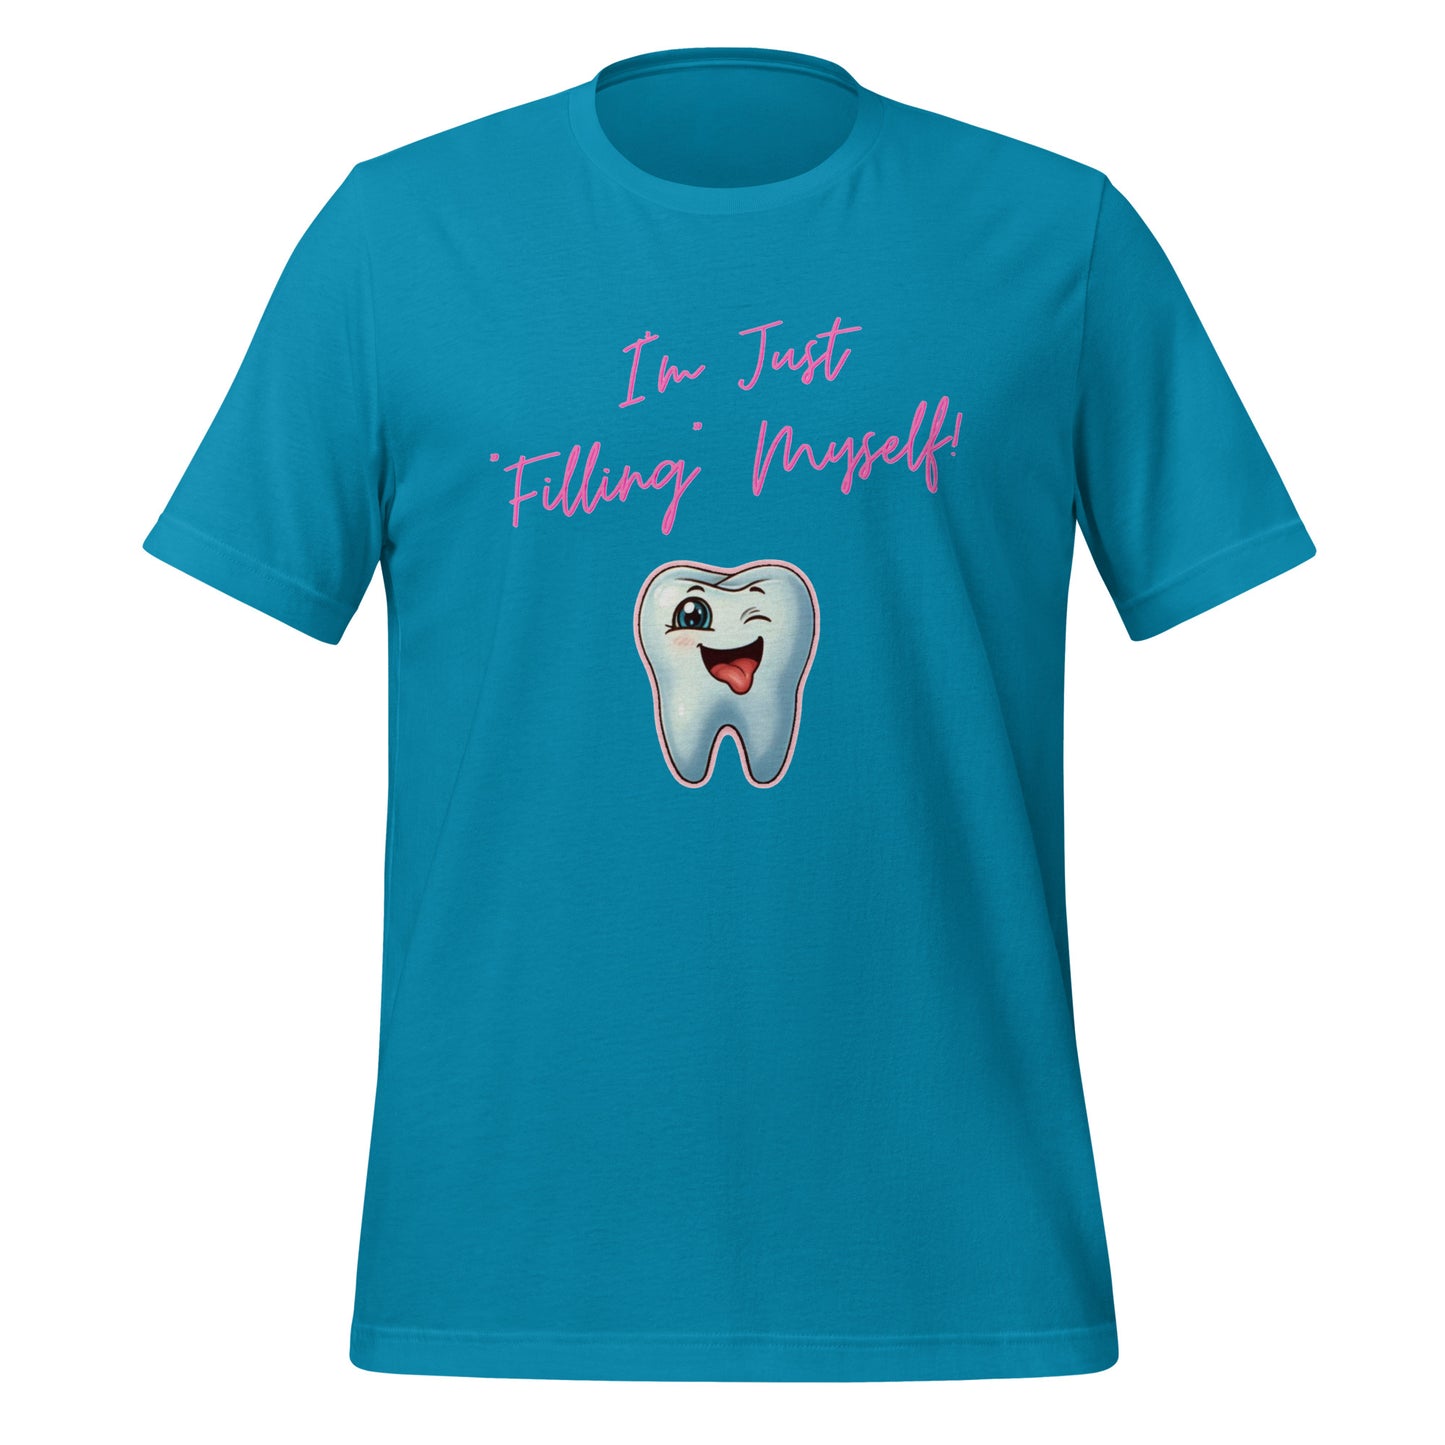 Flirtatious winking cartoon tooth character with the phrase "I'm just filling myself!" Ideal for a funny dental t-shirt or a cute dental assistant shirt. Aqua color. 